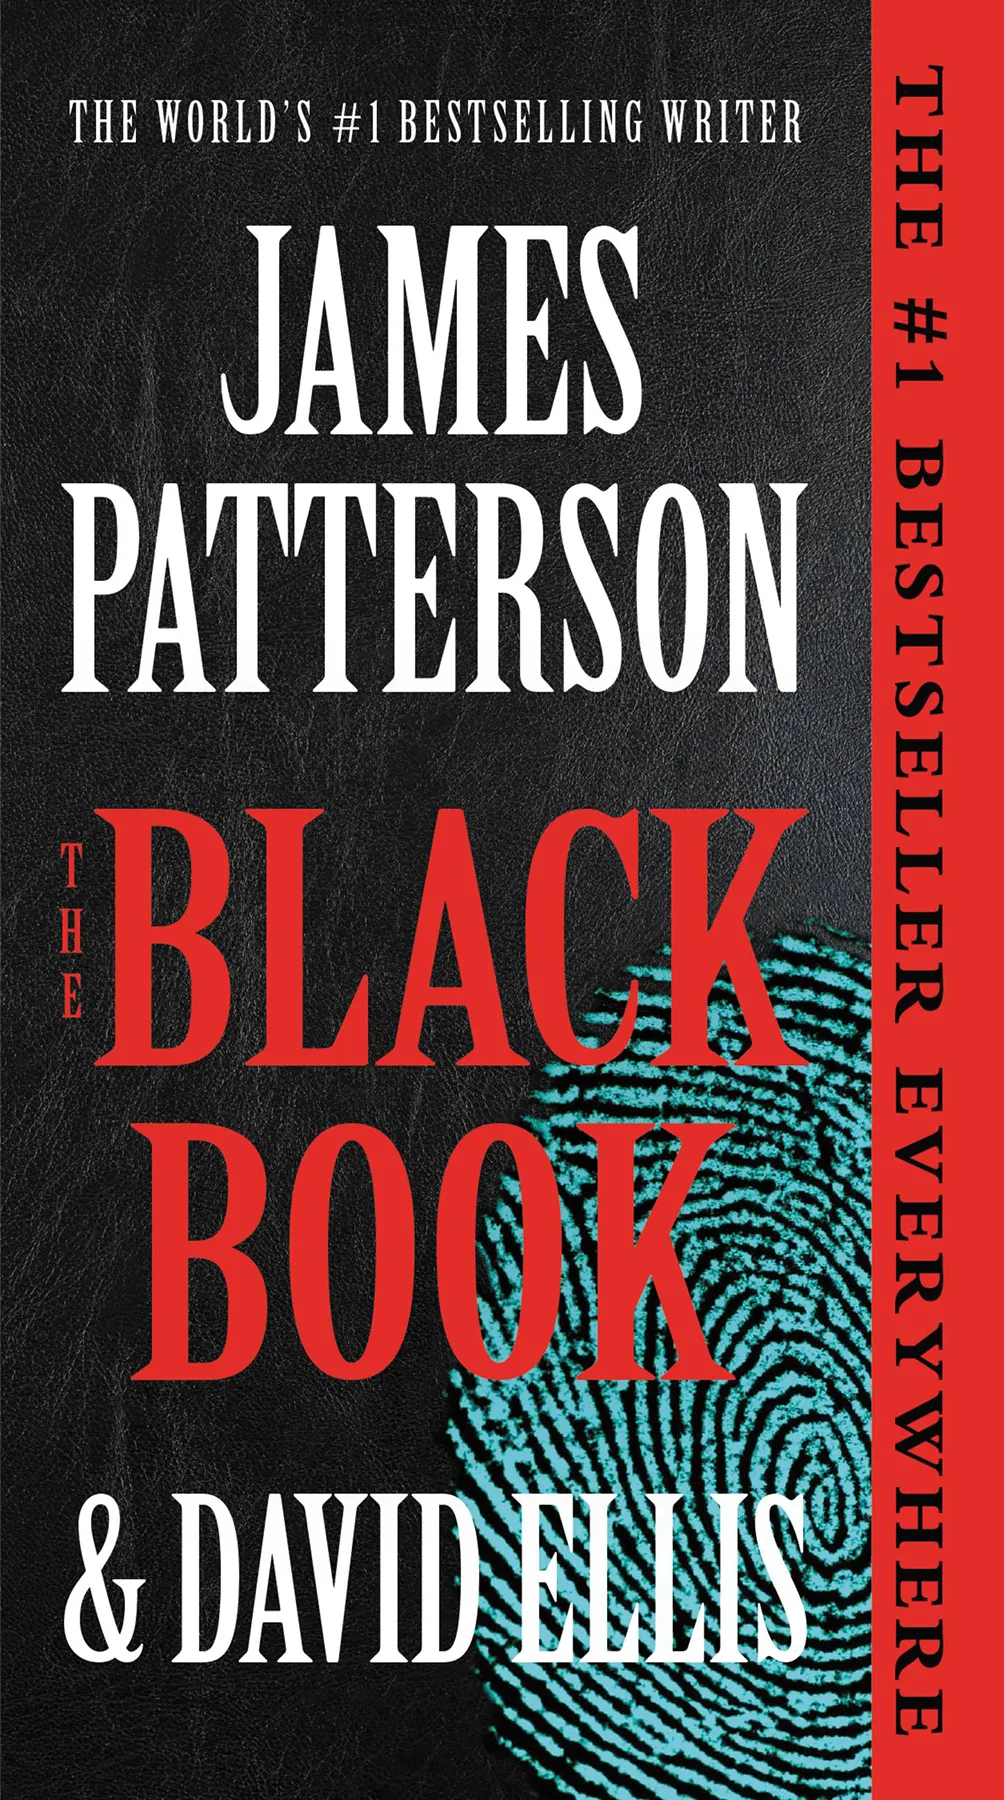 The Black Book (A Billy Harney Thriller #1)